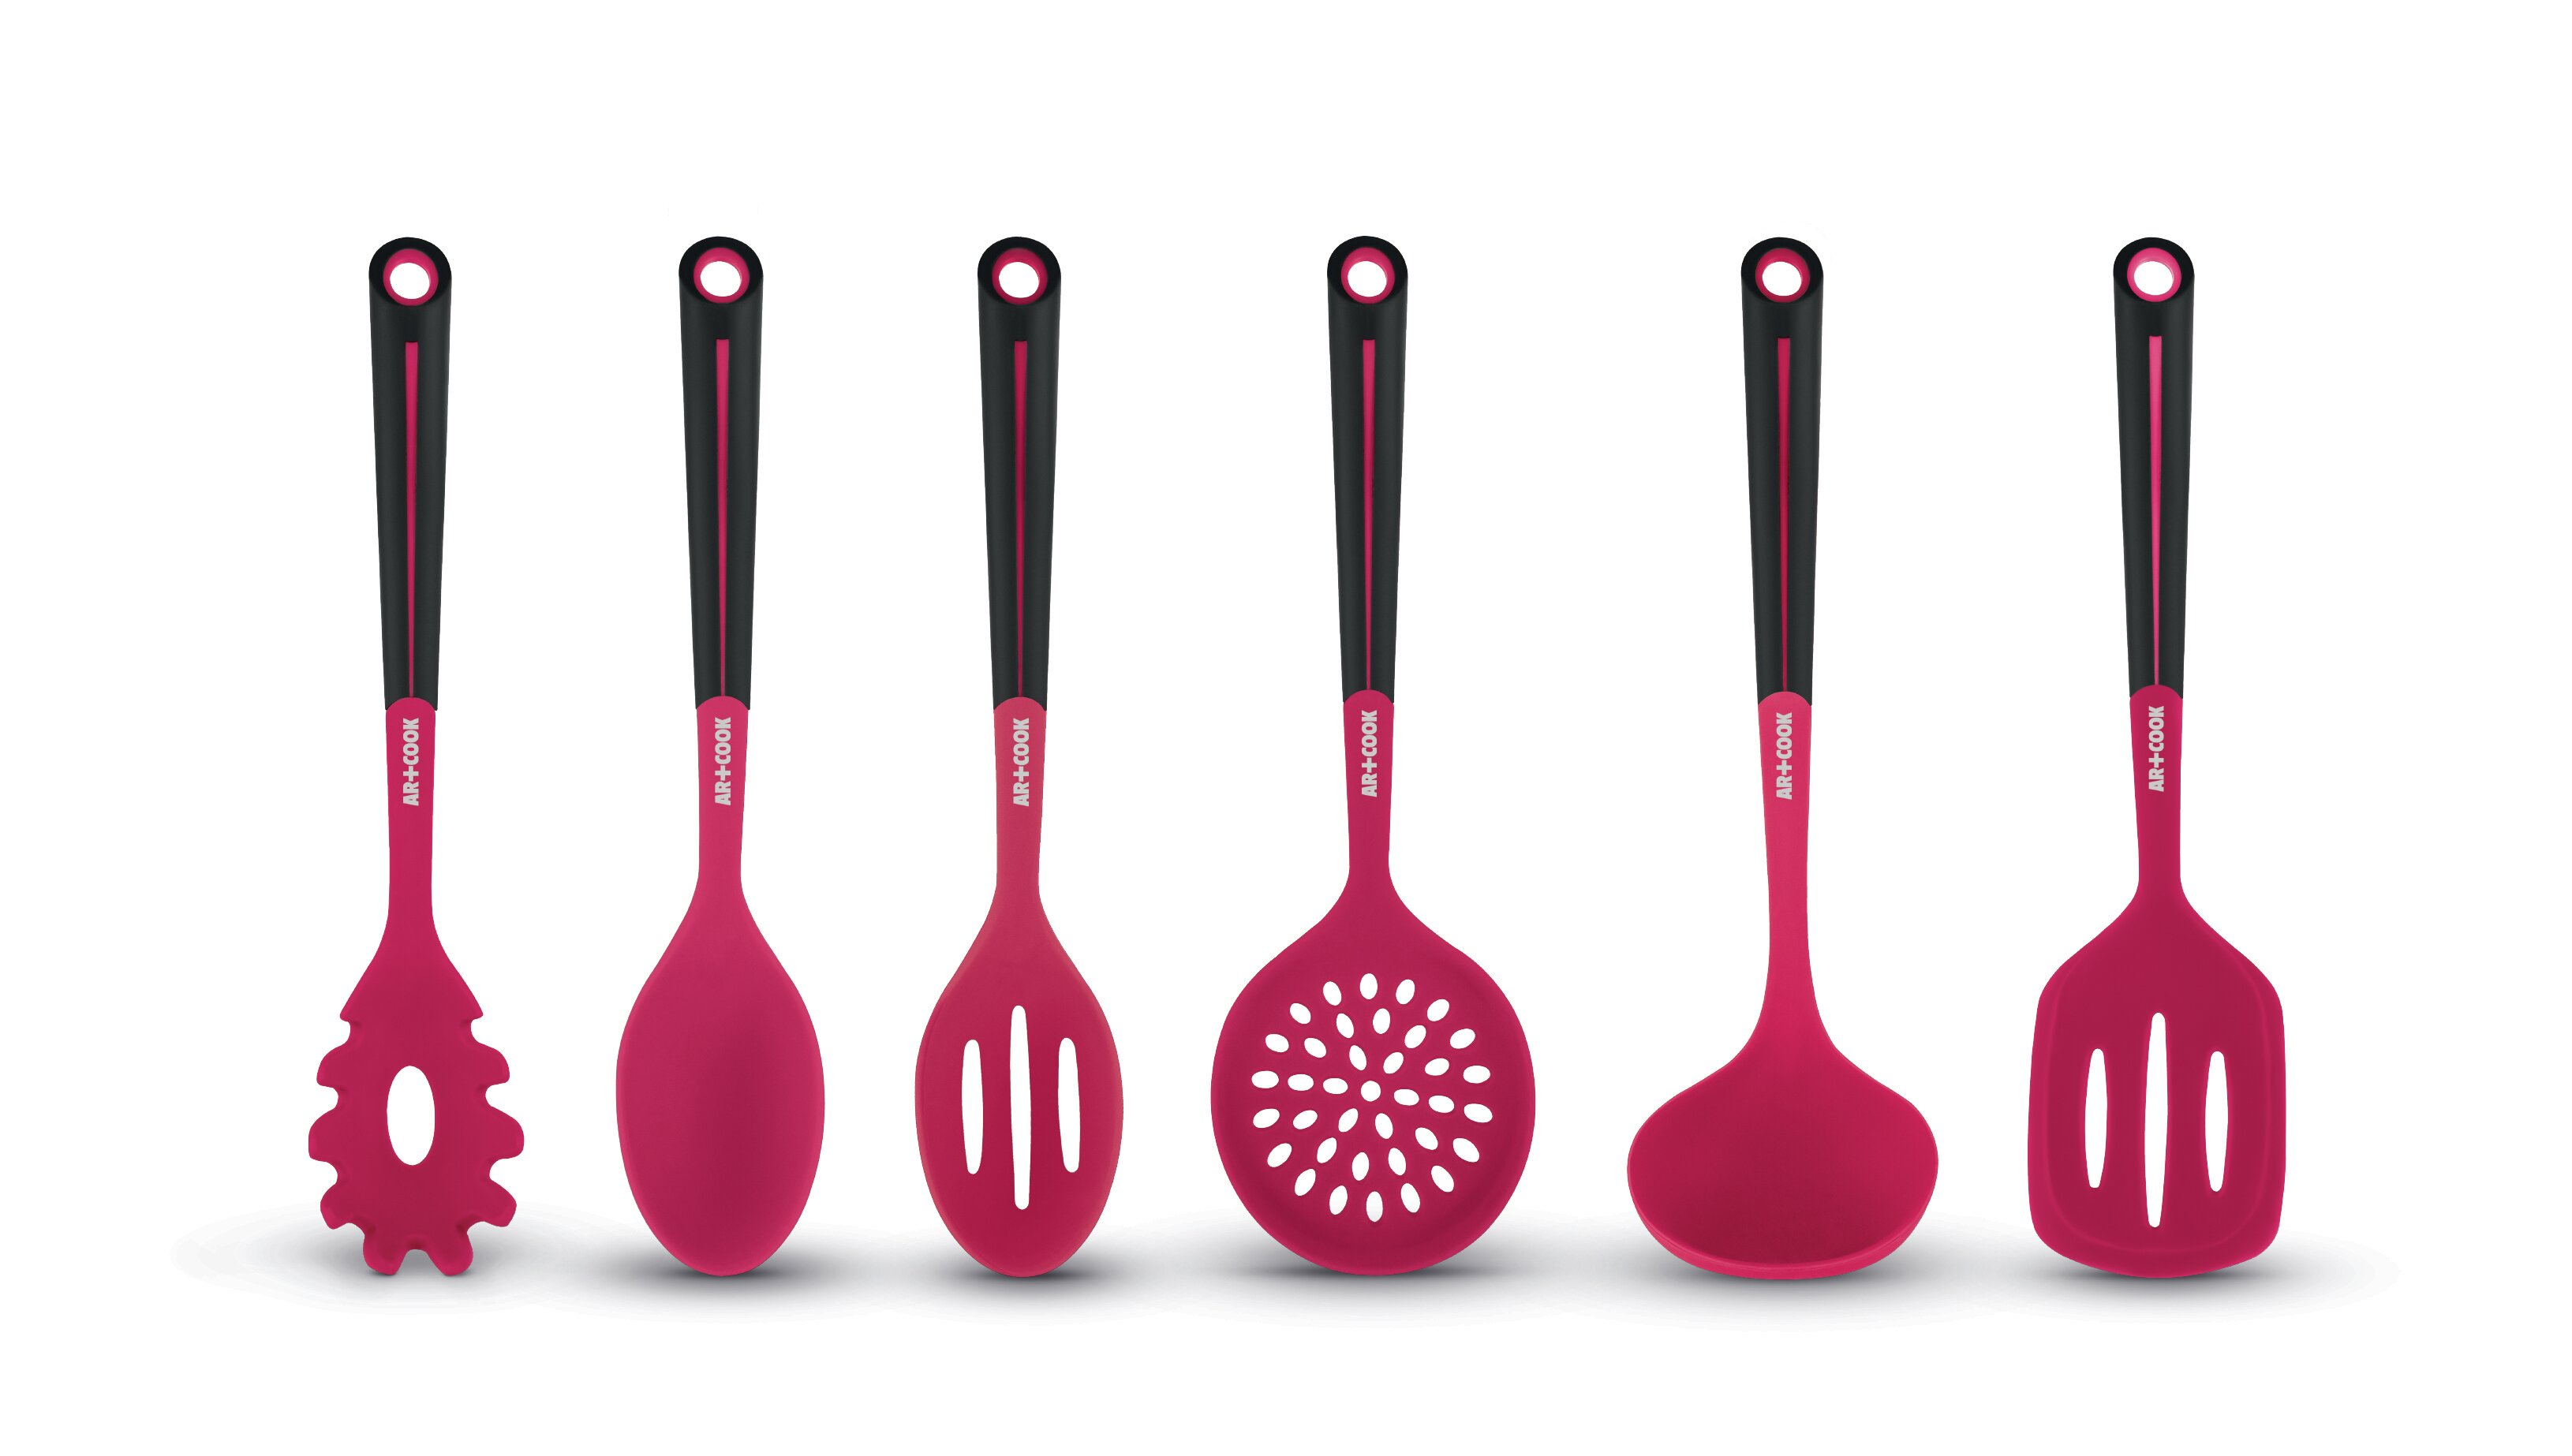 ExcelSteel 6 PC Utensil Set with Stainless Steel Handles Red